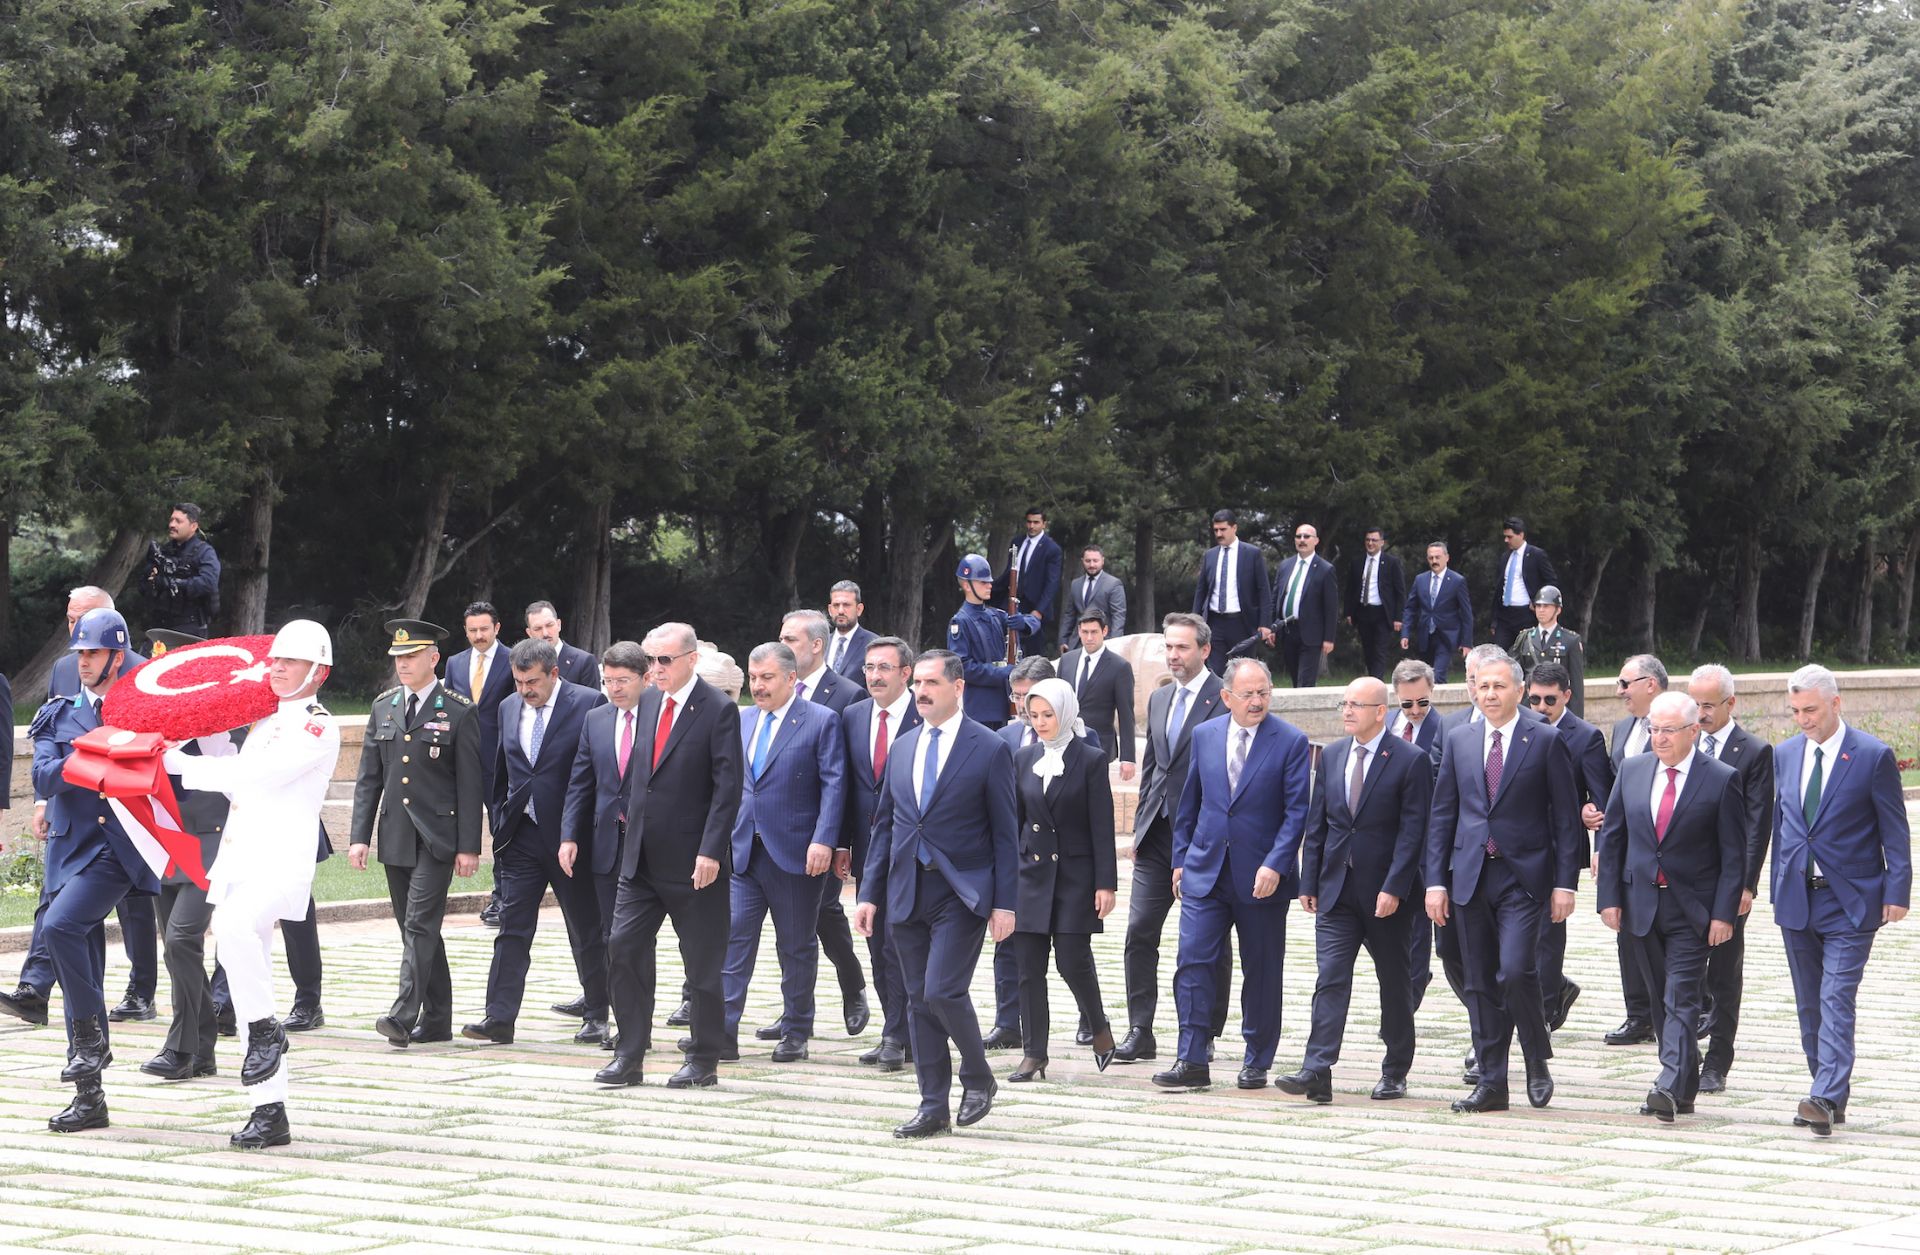 Turkish President Recep Tayyip Erdogan (center left, wearing a red tie) and his newly appointed cabinet members visit the Anıtkabir memorial site in Ankara, Turkey, on June 6, 2023.